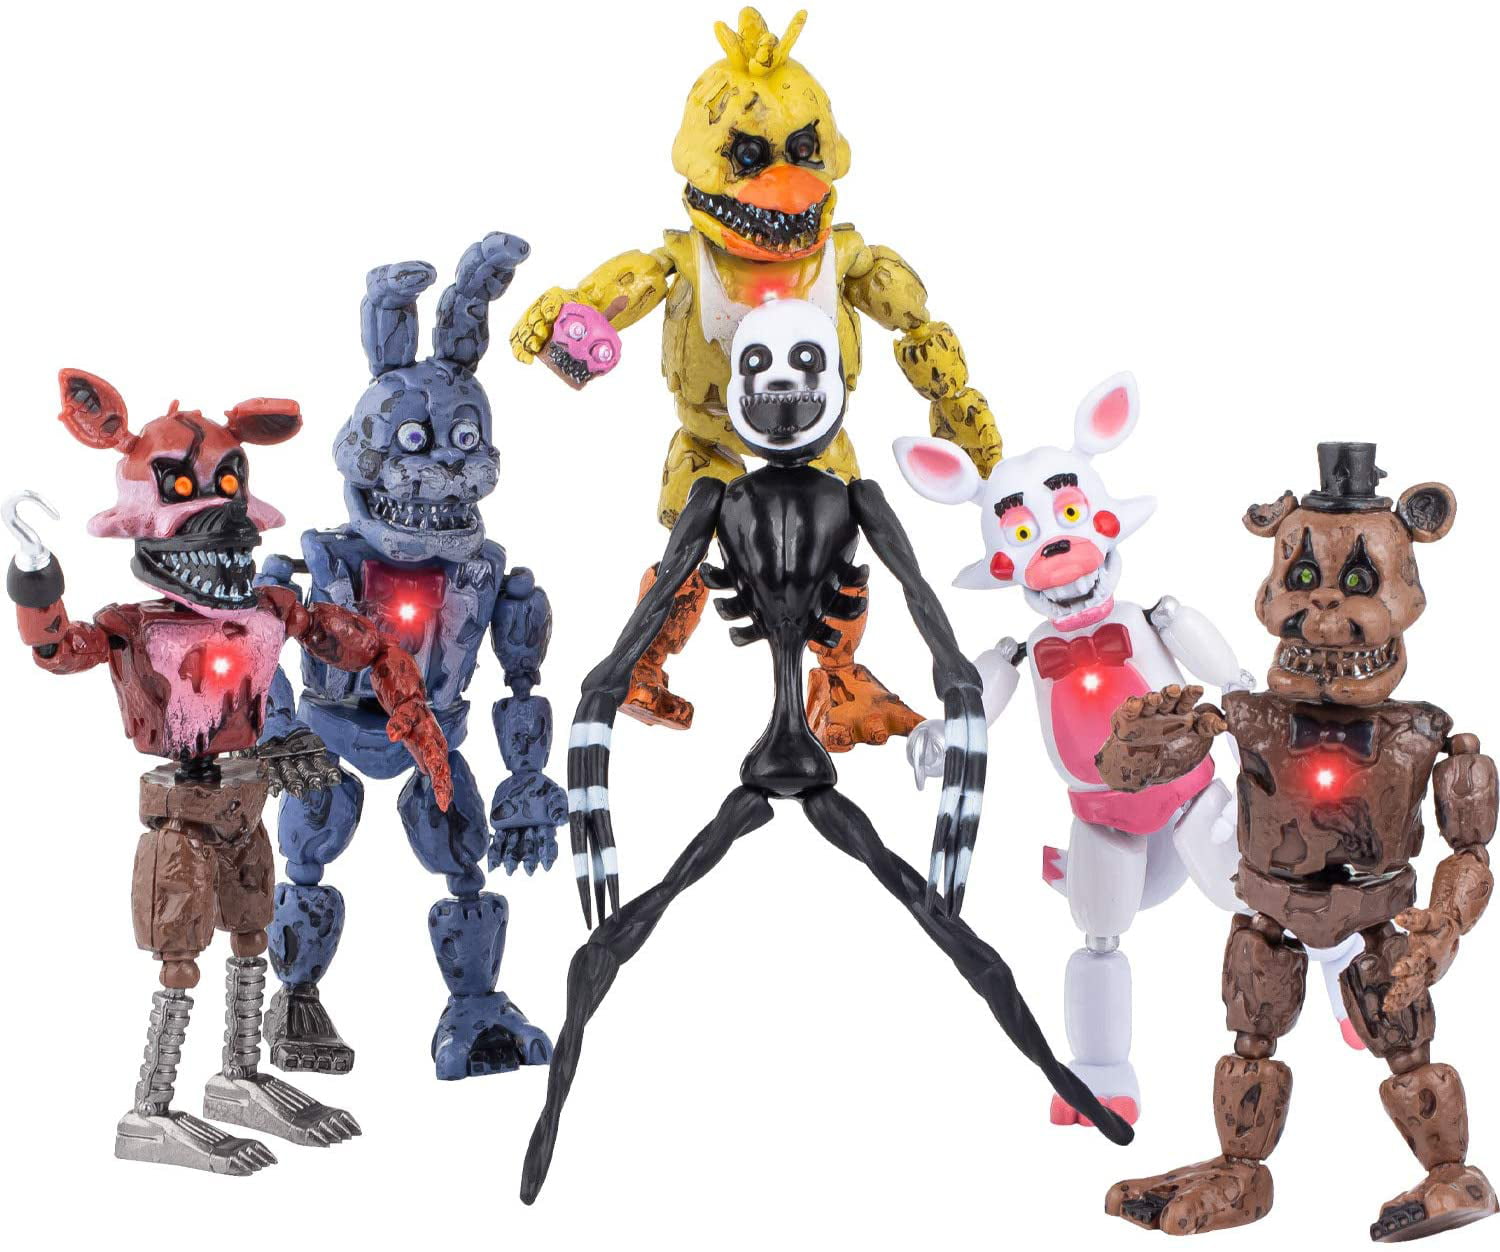 2017 New Aarrival 6Pcs FNAF Five Nights at Freddy's Action Figures Toys DIY Gift 